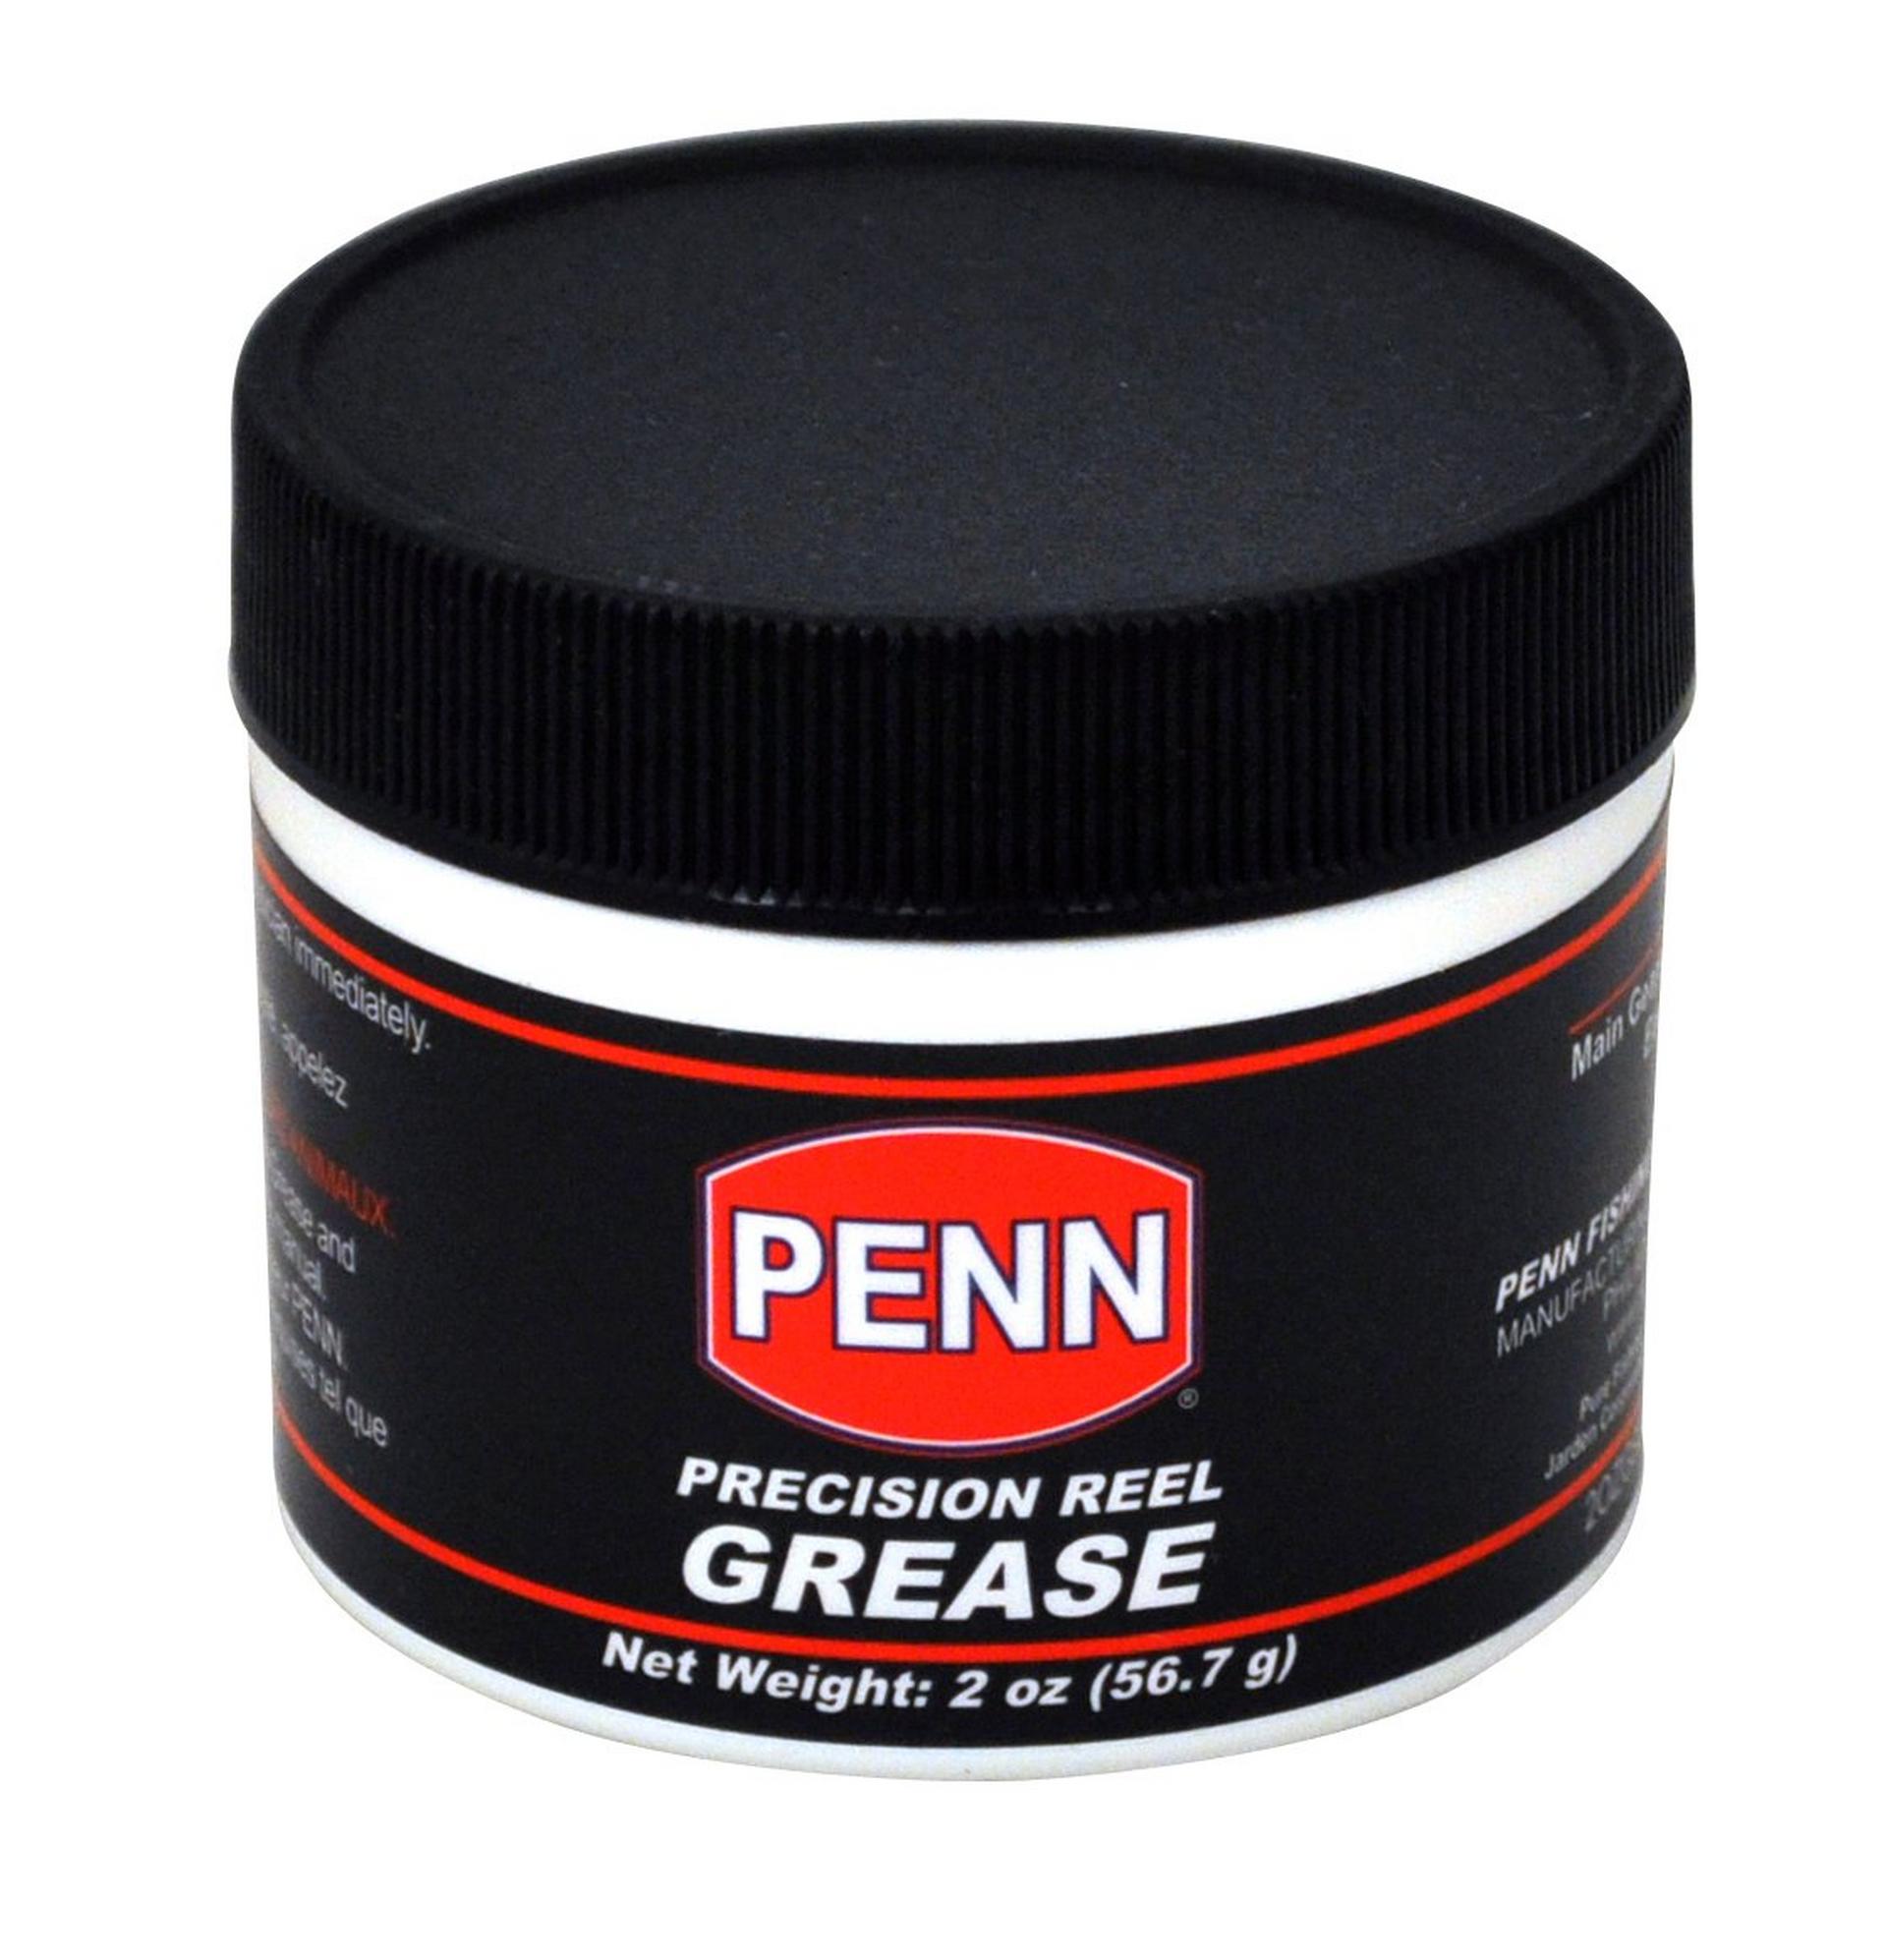 PENN grease for maintenance of reels and rods - Pescamania